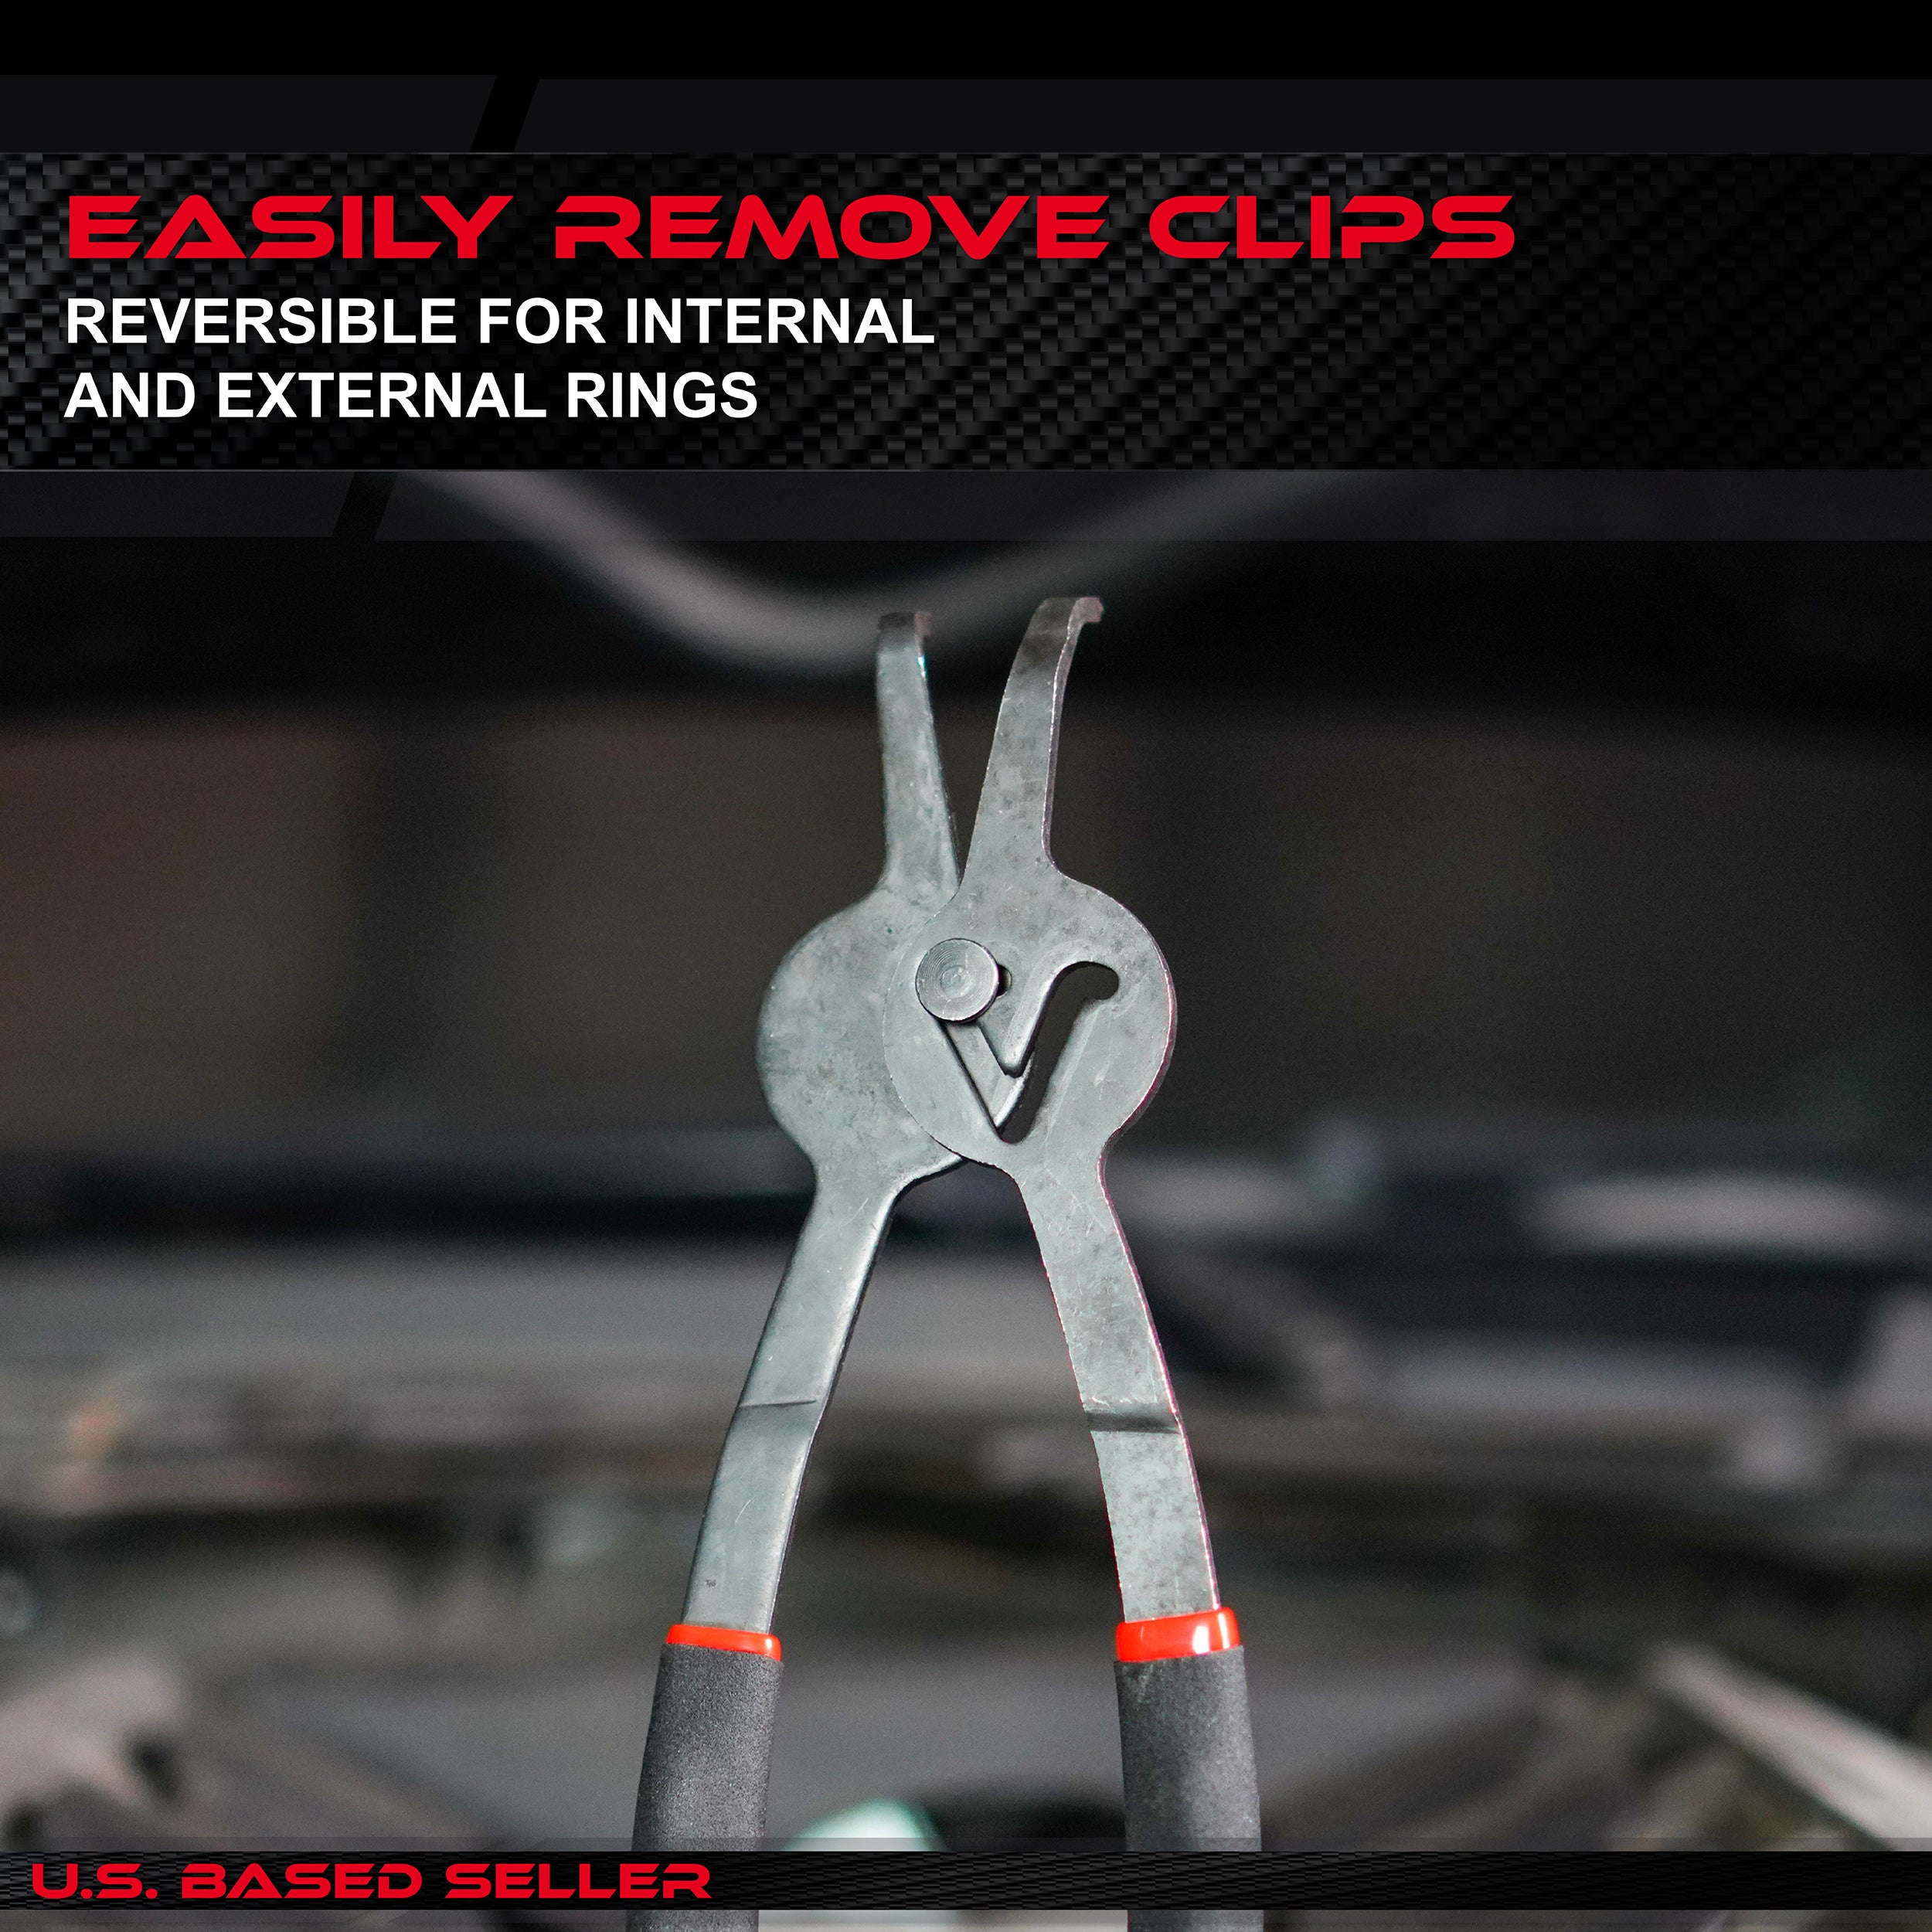 Snap Ring Tool Kit - Set of 12 Angled and Straight Circle Clip Pliers